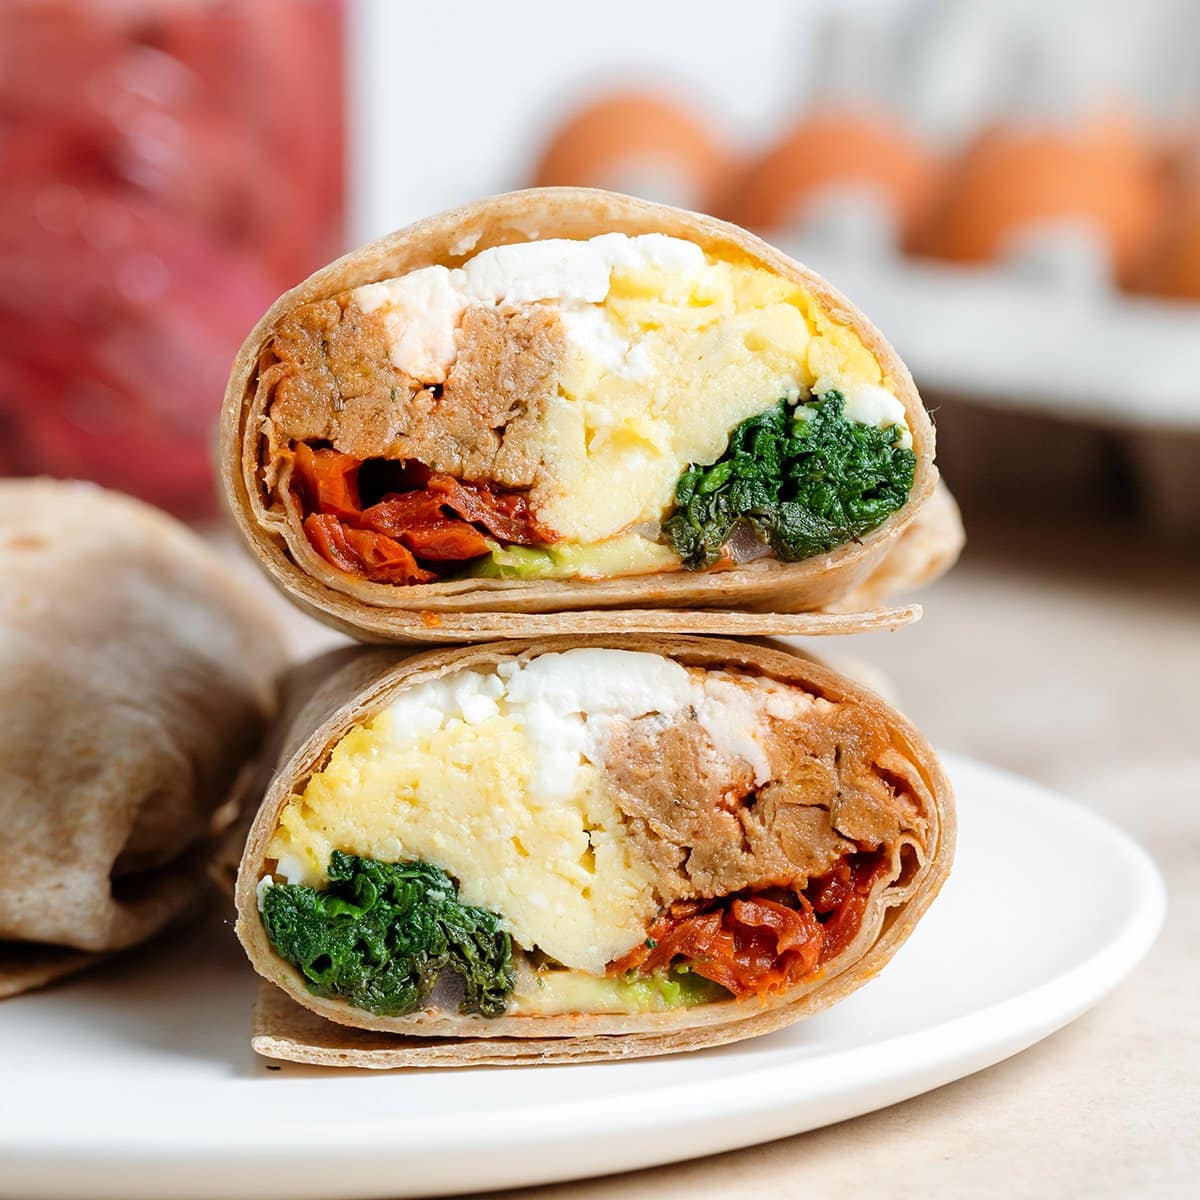 A breakfast burrito cut in half showing eggs, spinach, and sausage inside on a white plate.